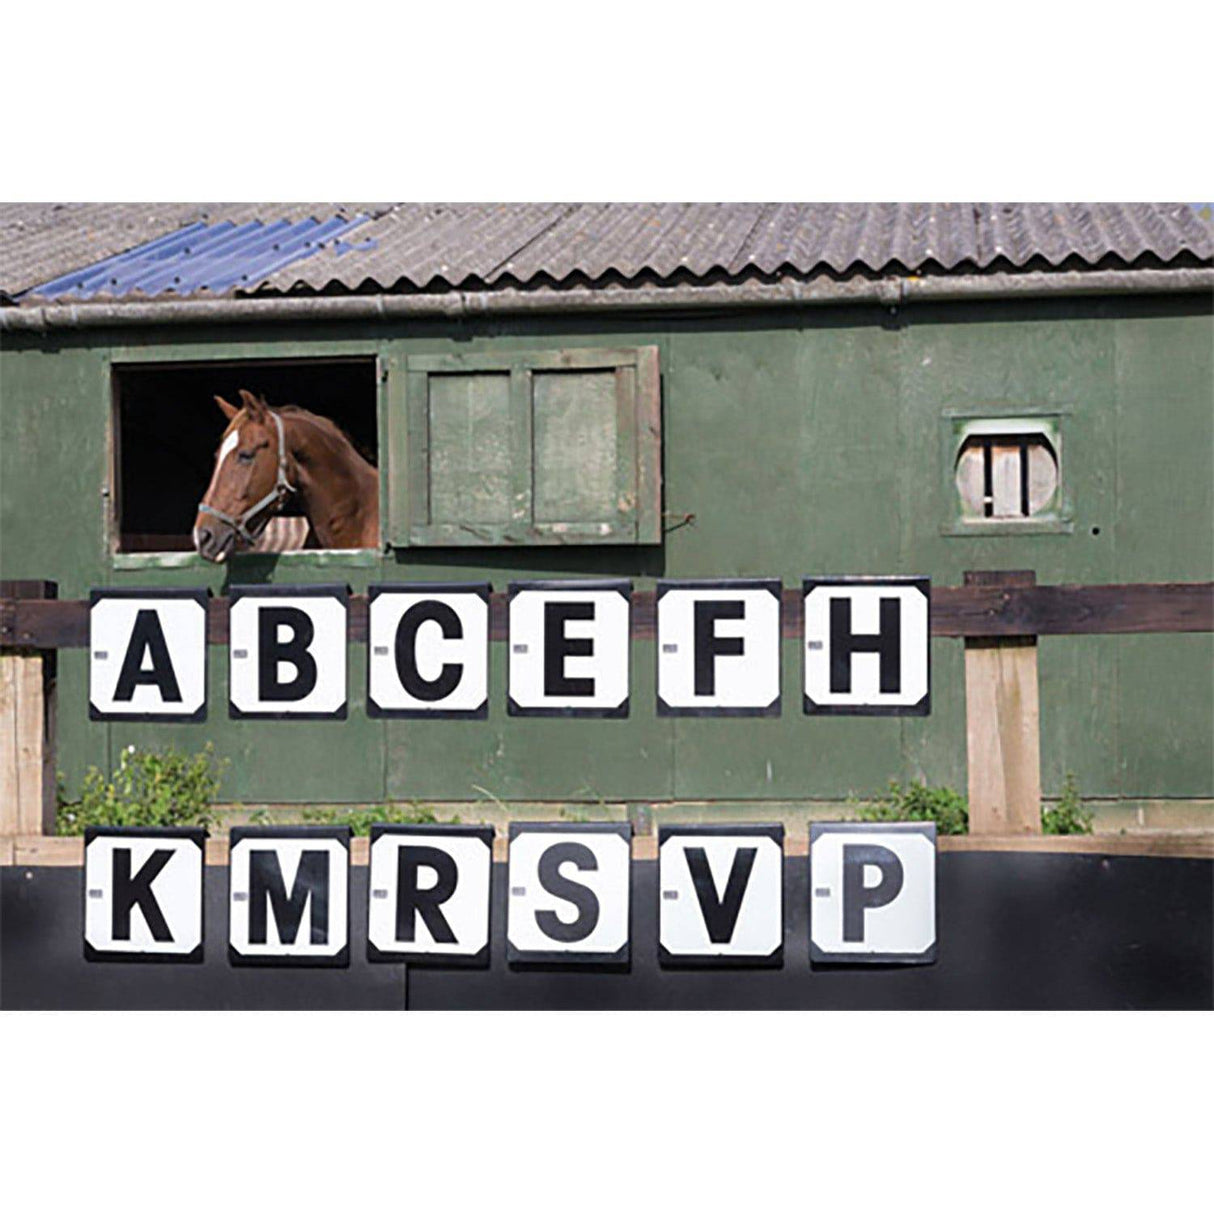 Stubbs Hook On Dressage Letters Markers 12 Arena Barnstaple Equestrian Supplies